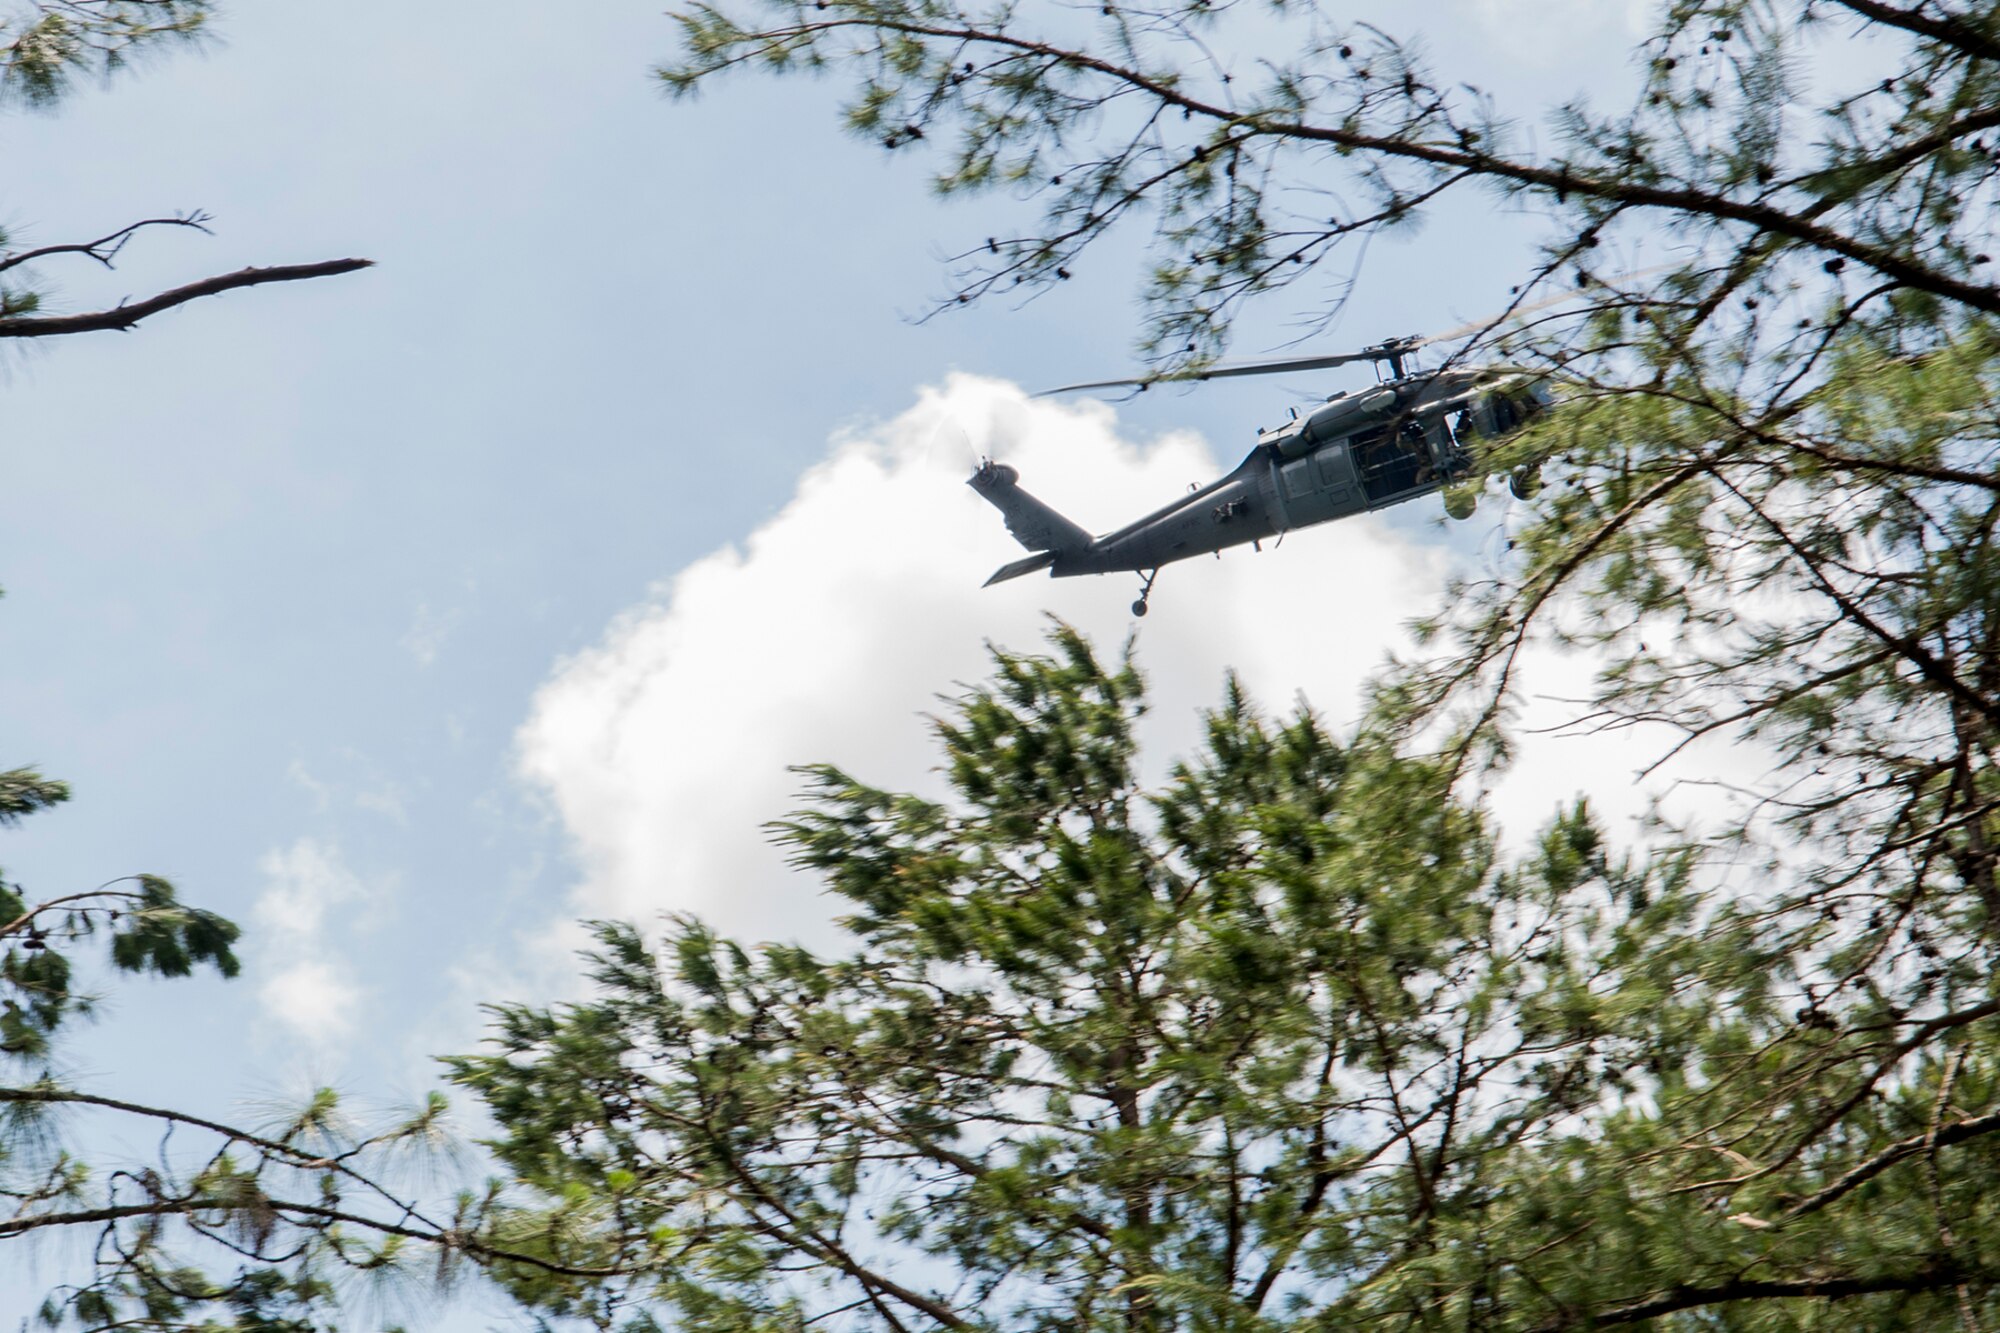 A U.S. Air Force HH-60 Pave Hawk helicopter flies overhead as it searches for a group of 93rd Bomb Squadron aircrew during SERE training on May 14, 2016, Claiborne Gunnery and Bombing Range, La. SERE, which stands for Survival, Evasion, Resistance and Escape, is required training for all aircrew members and provides the knowledge and tools necessary to survive on their own in any environment and under any condition should they have to abandon their aircraft. (U.S. Air Force photo by Master Sgt. Greg Steele/Released)